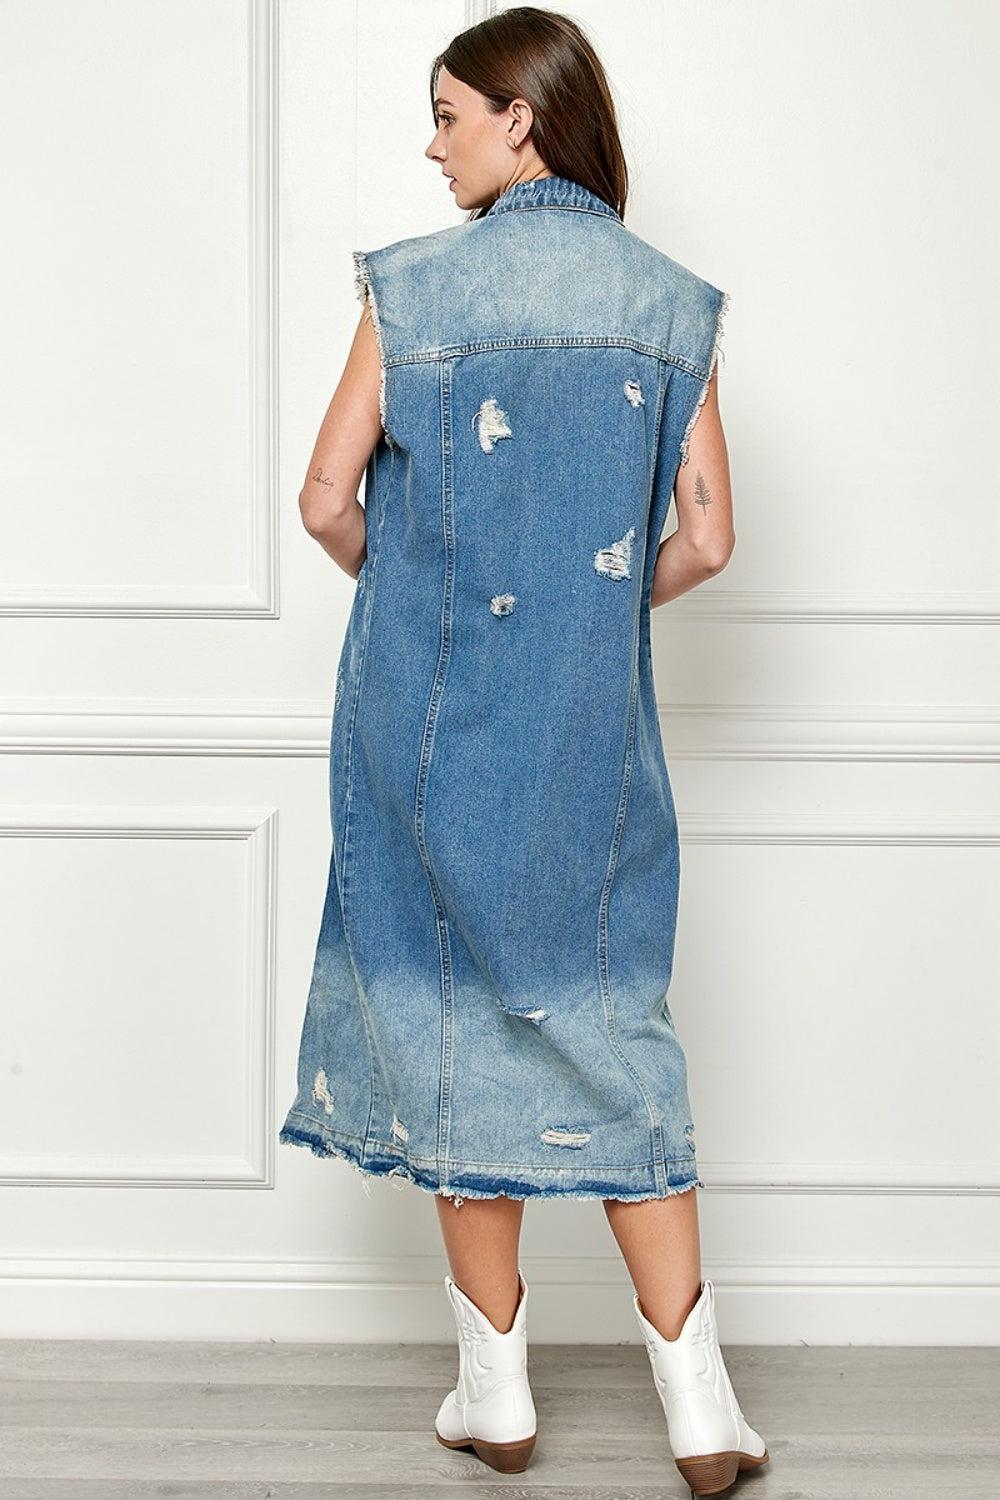 a woman wearing a denim dress with holes on it